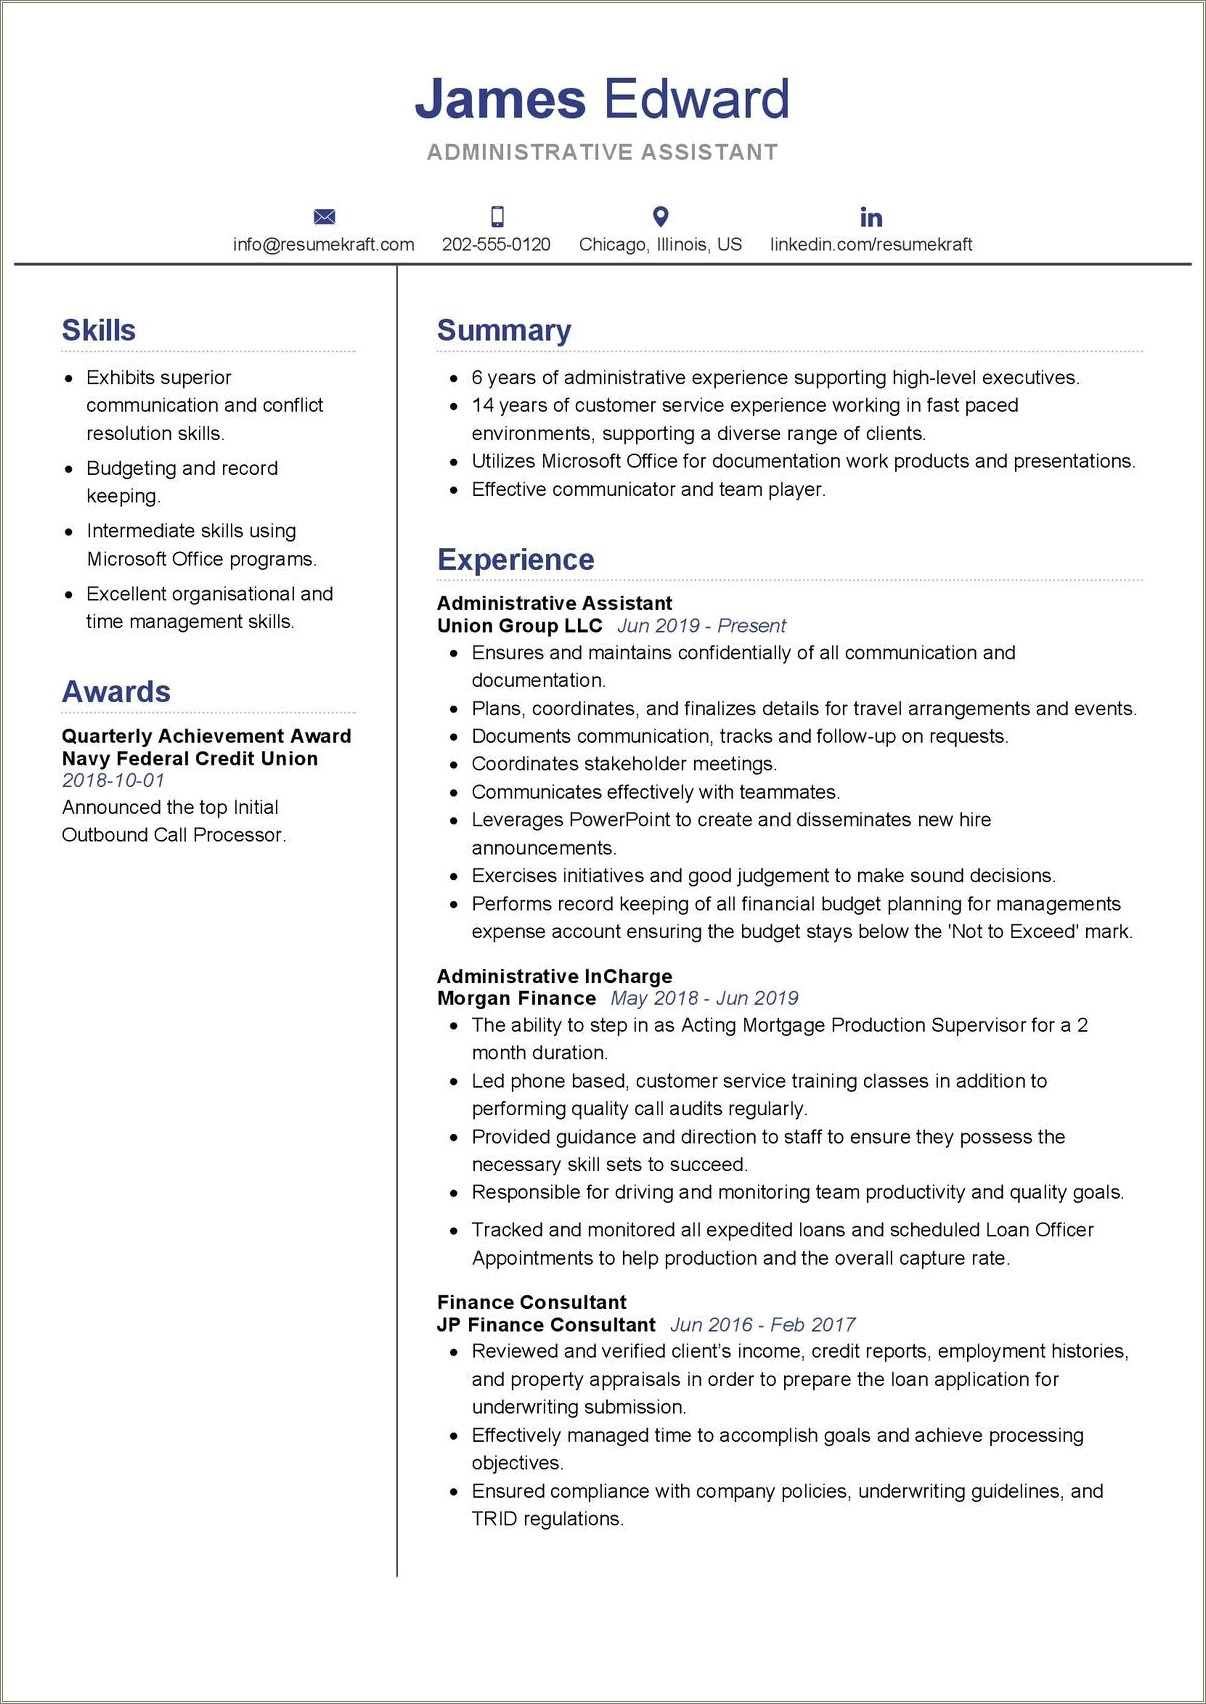 Examples Of Administrative Assistant Goals For Resume